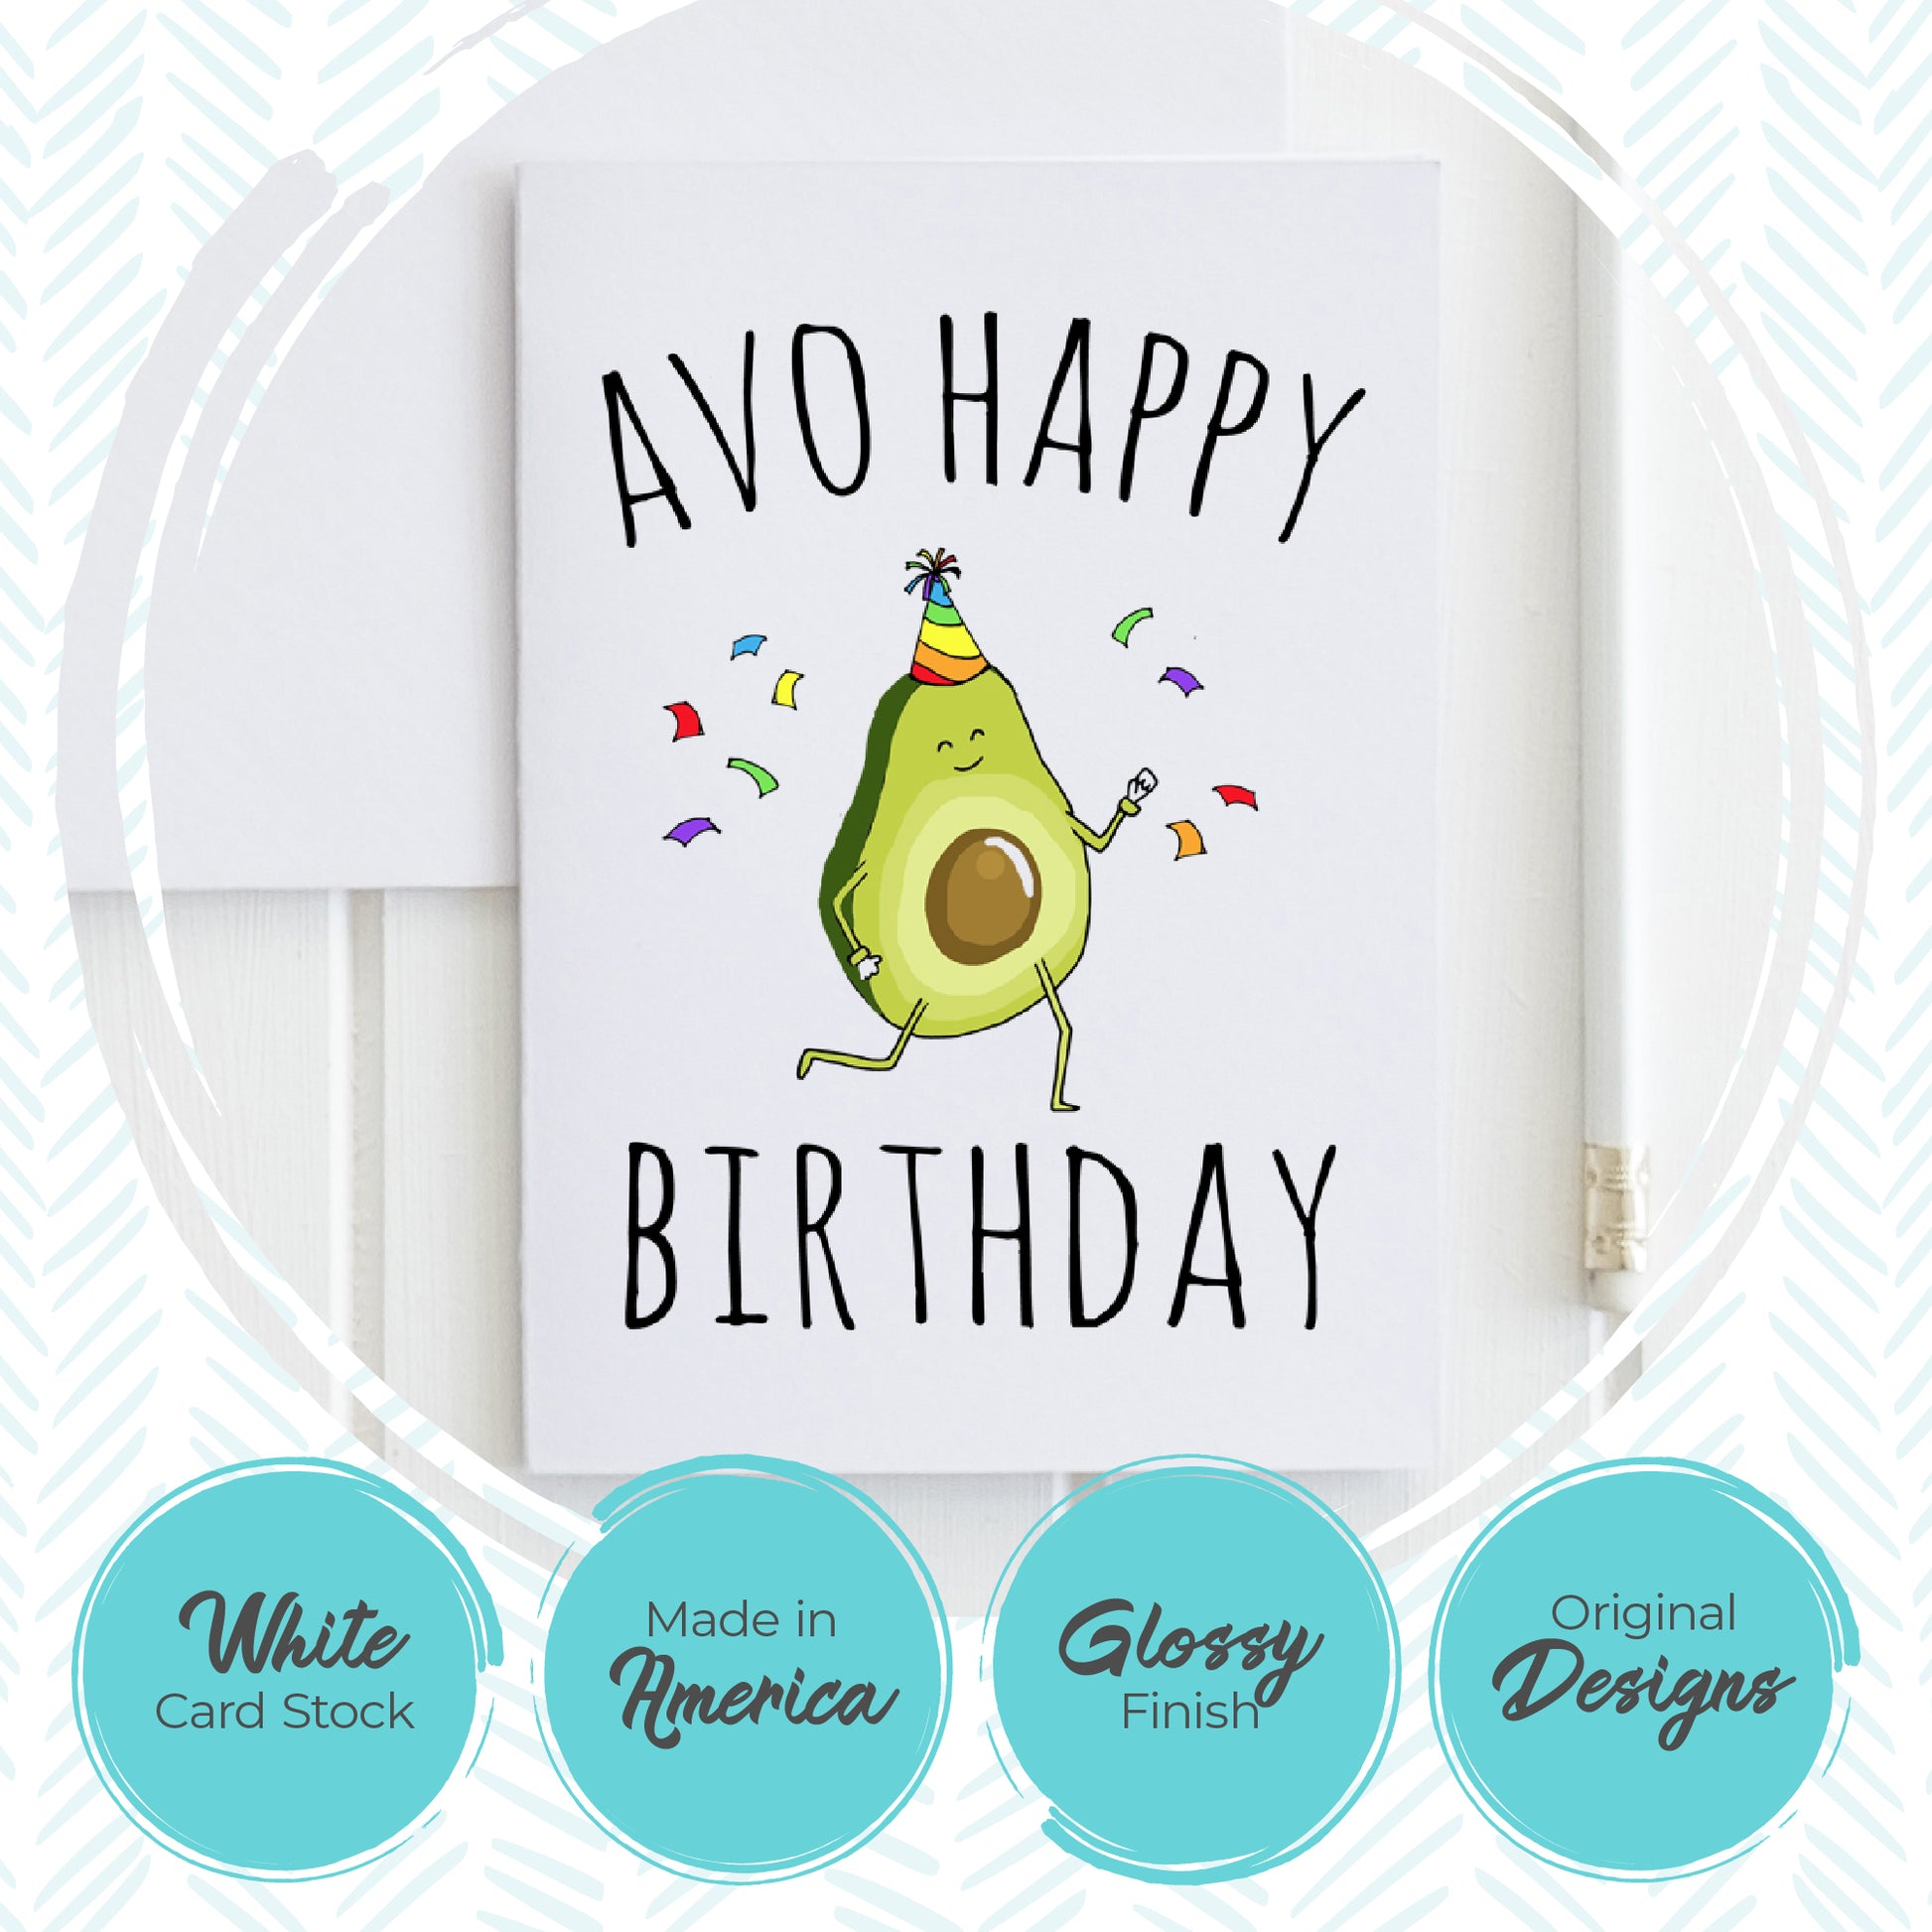 I Was Hangry Forgive Me - Greeting Card - MoonlightMakers